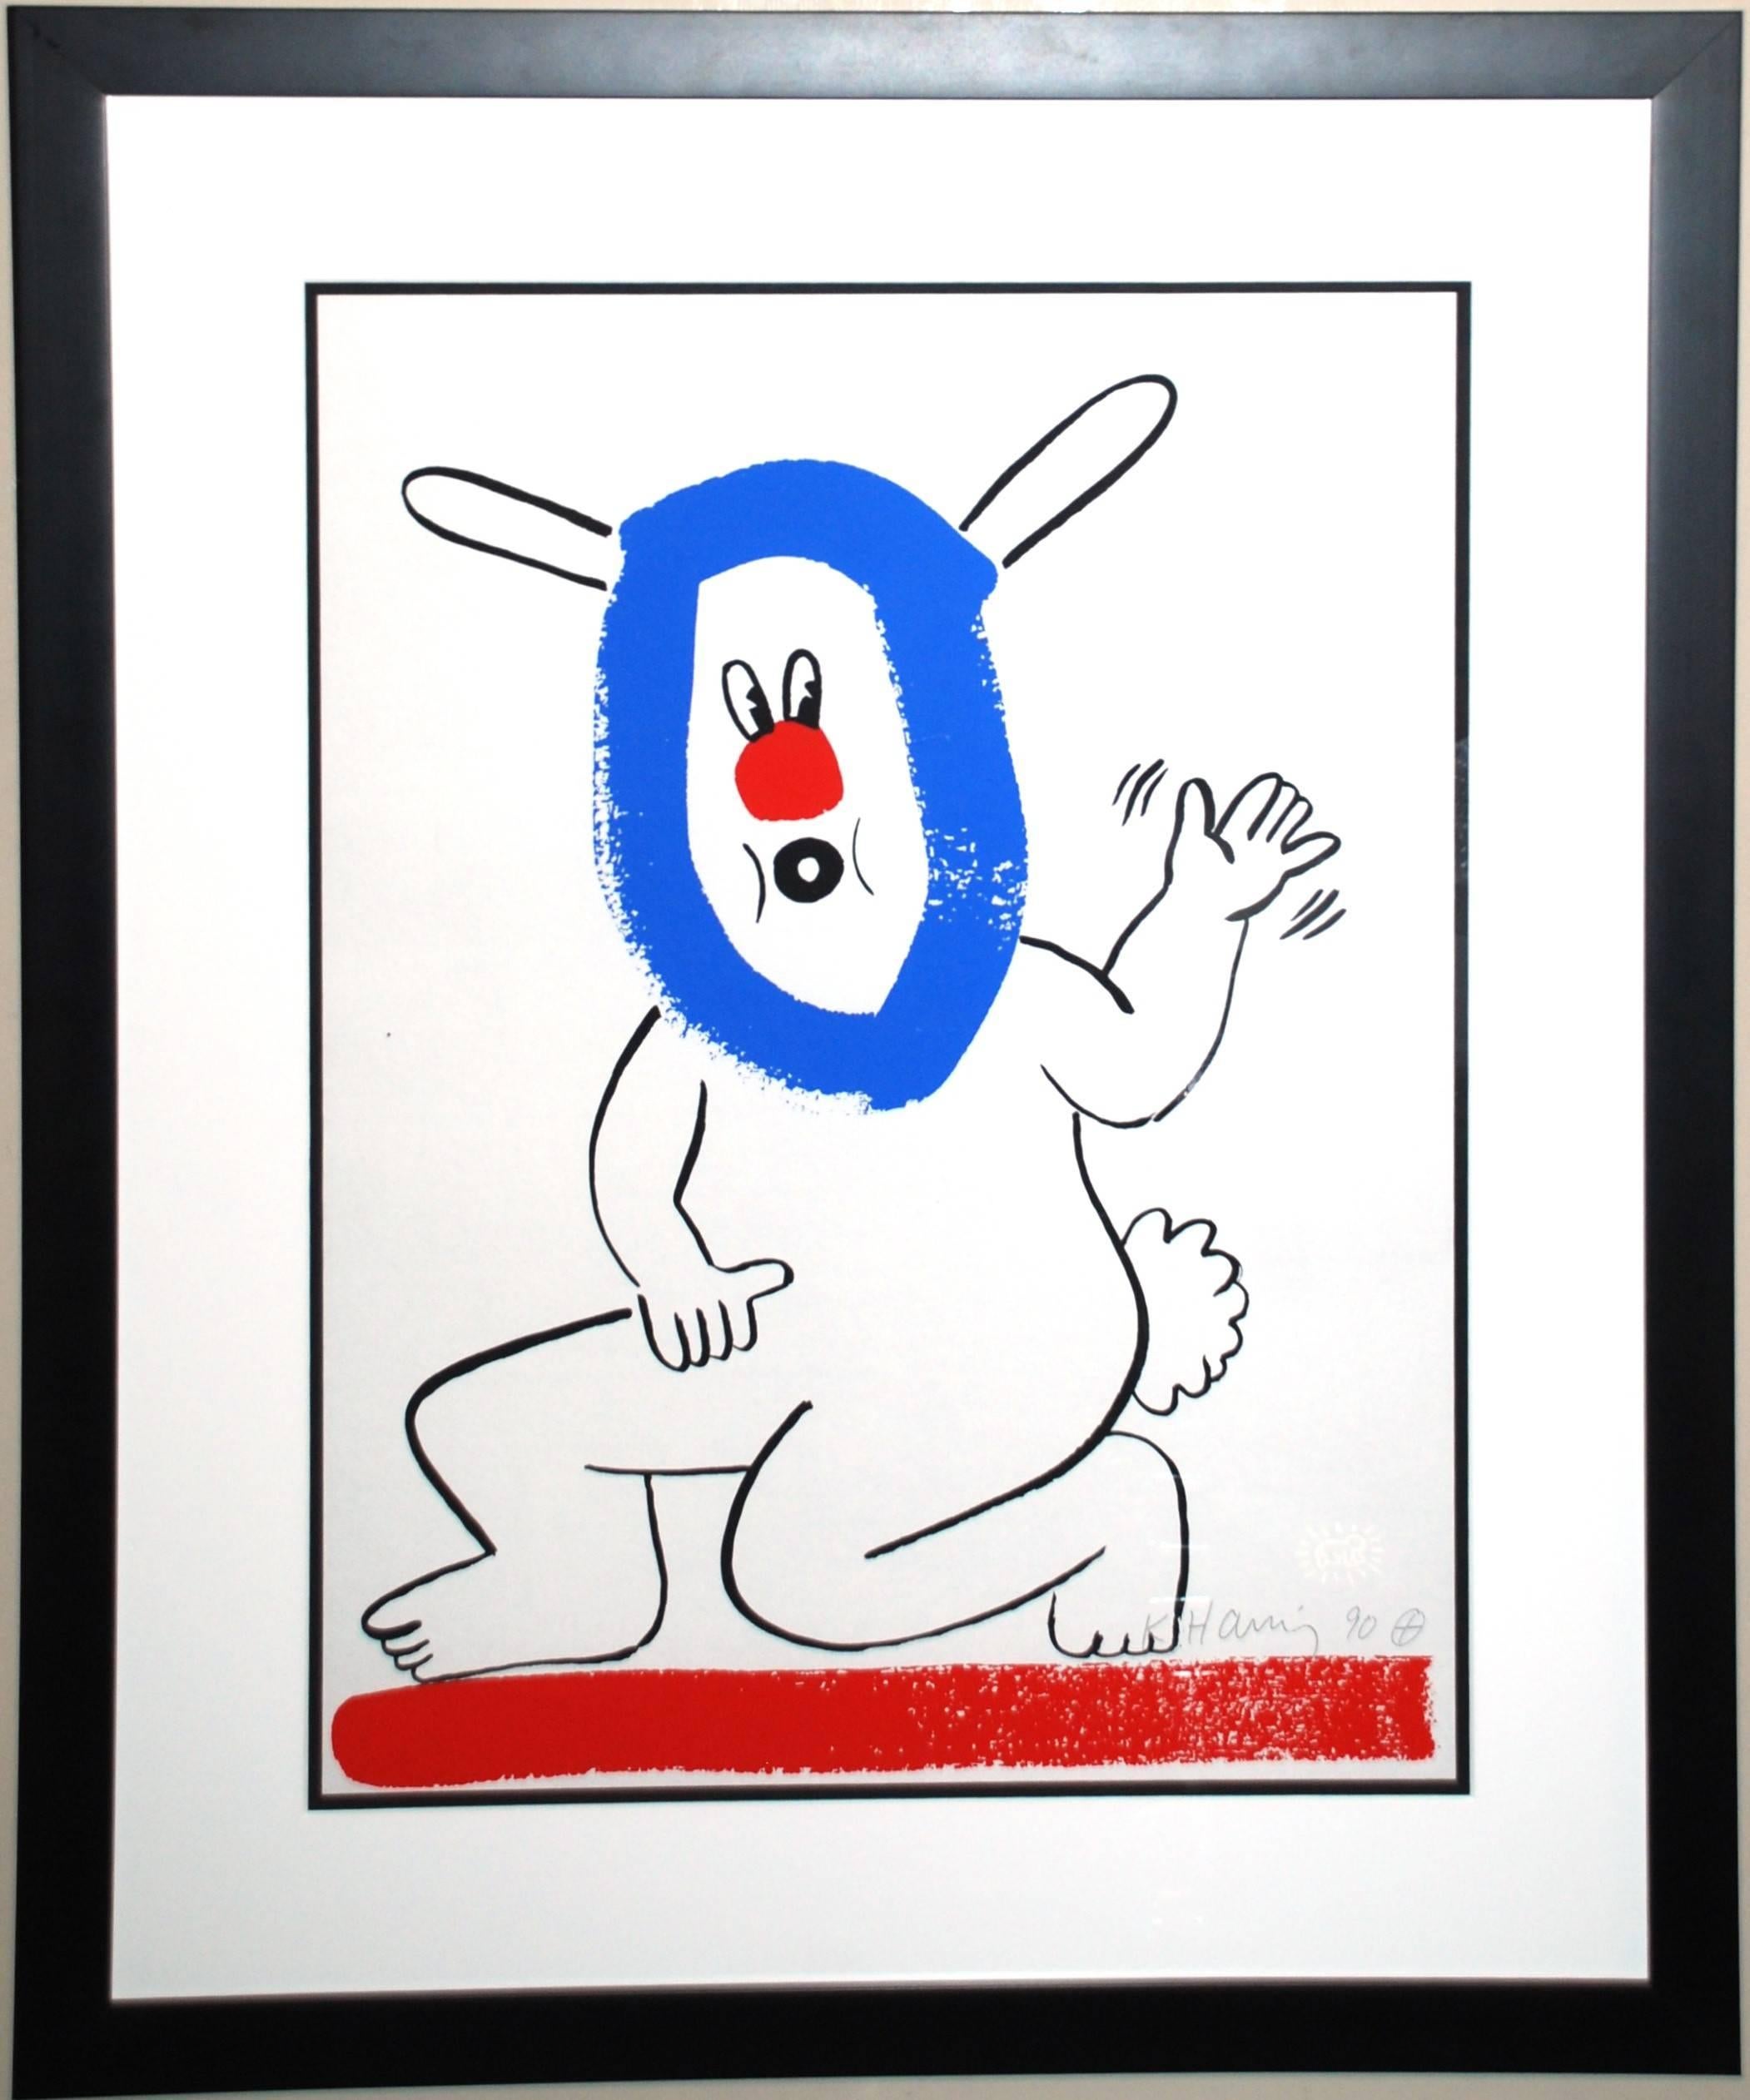 Plate 18, The Story of Red and Blue - Print by Keith Haring